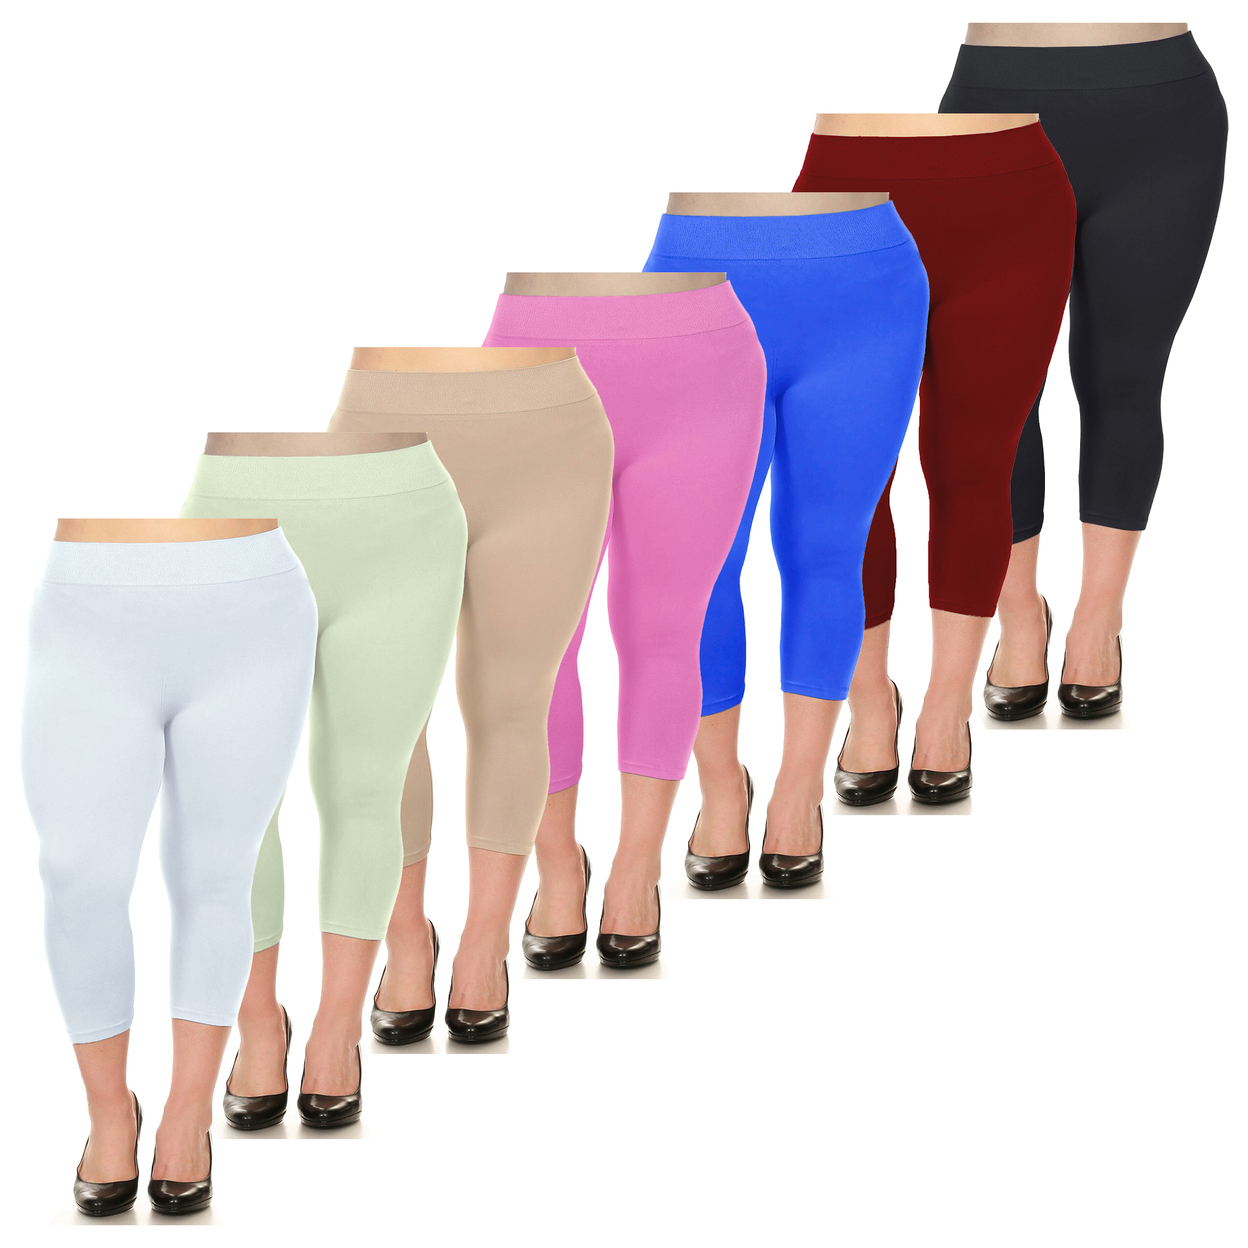 Women's Ultra-Soft High Waisted Smooth Stretch Active Yoga Capri Leggings Plus Size Available - Red, 2x